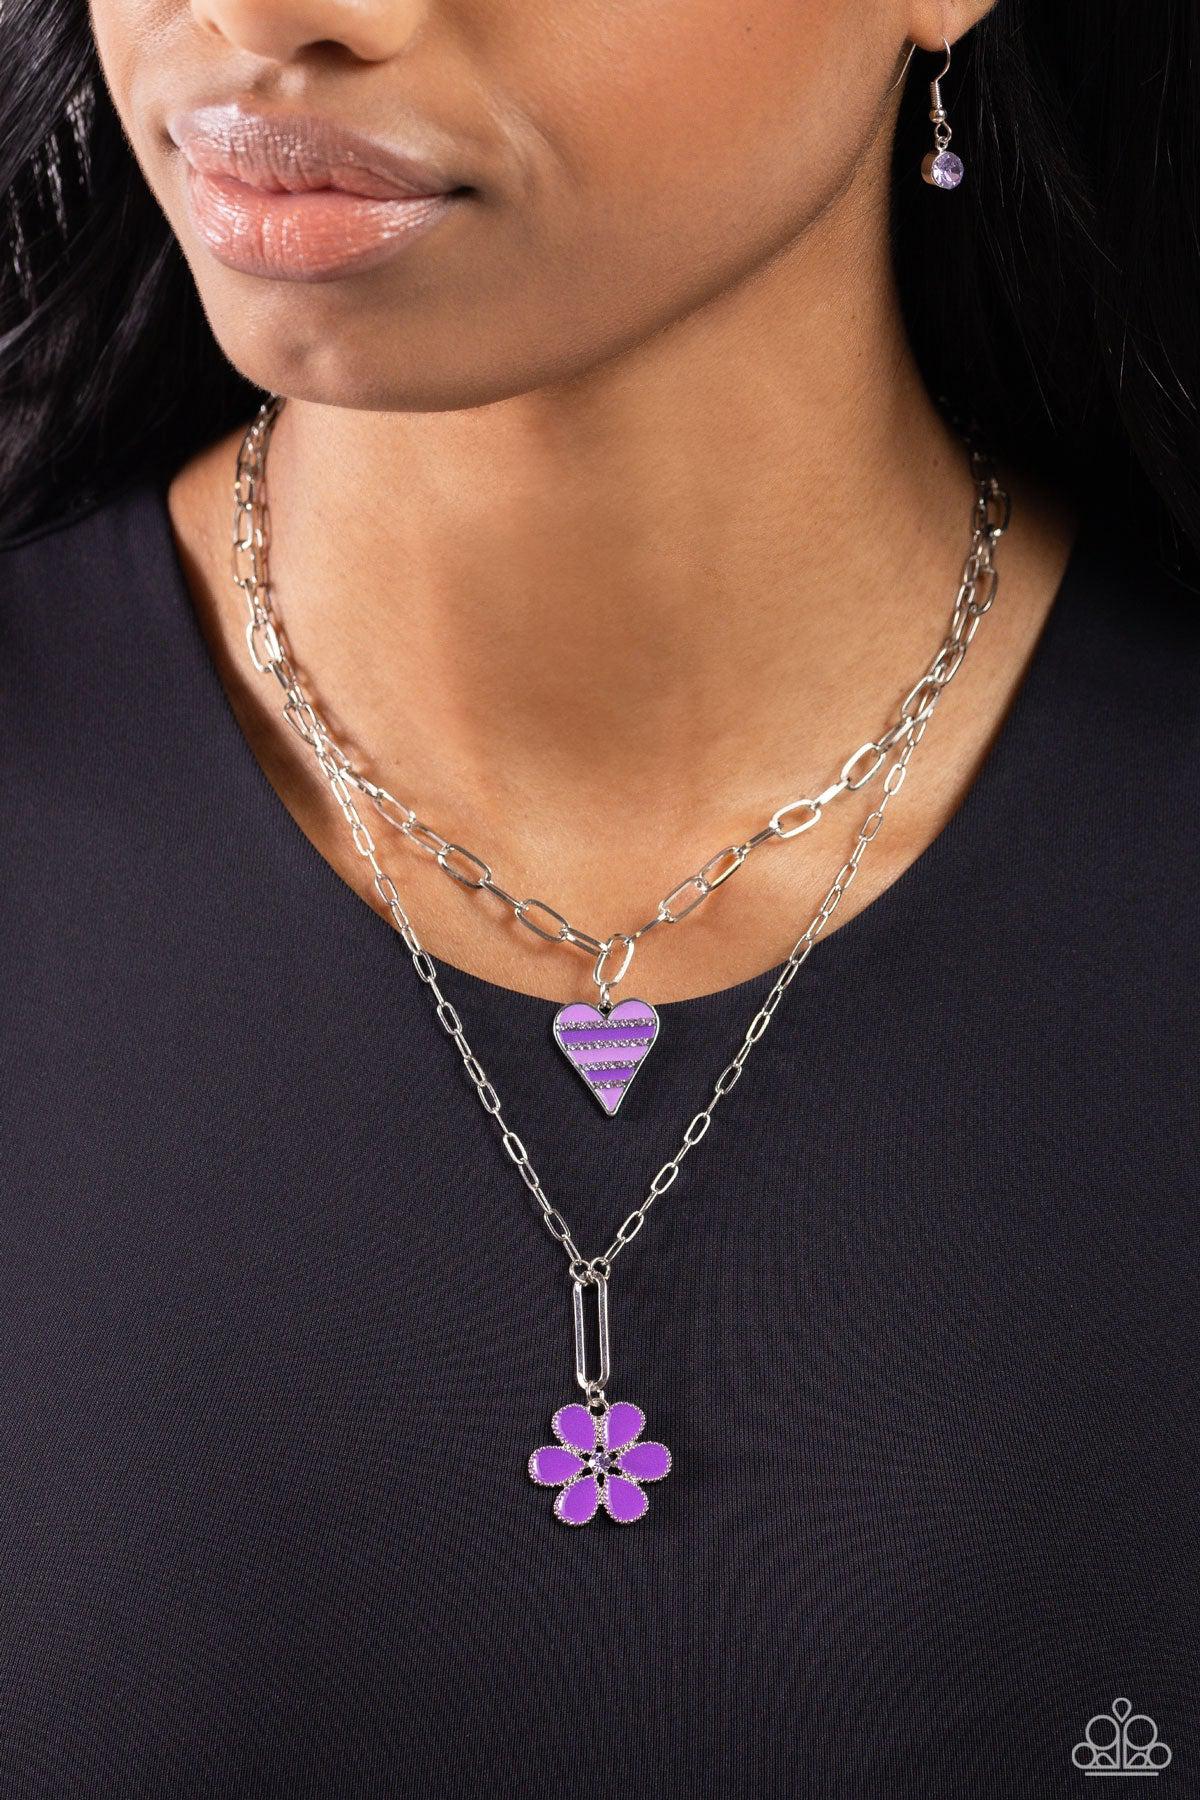 Childhood Charms Purple Heart & Flower Necklace - Paparazzi Accessories- lightbox - CarasShop.com - $5 Jewelry by Cara Jewels